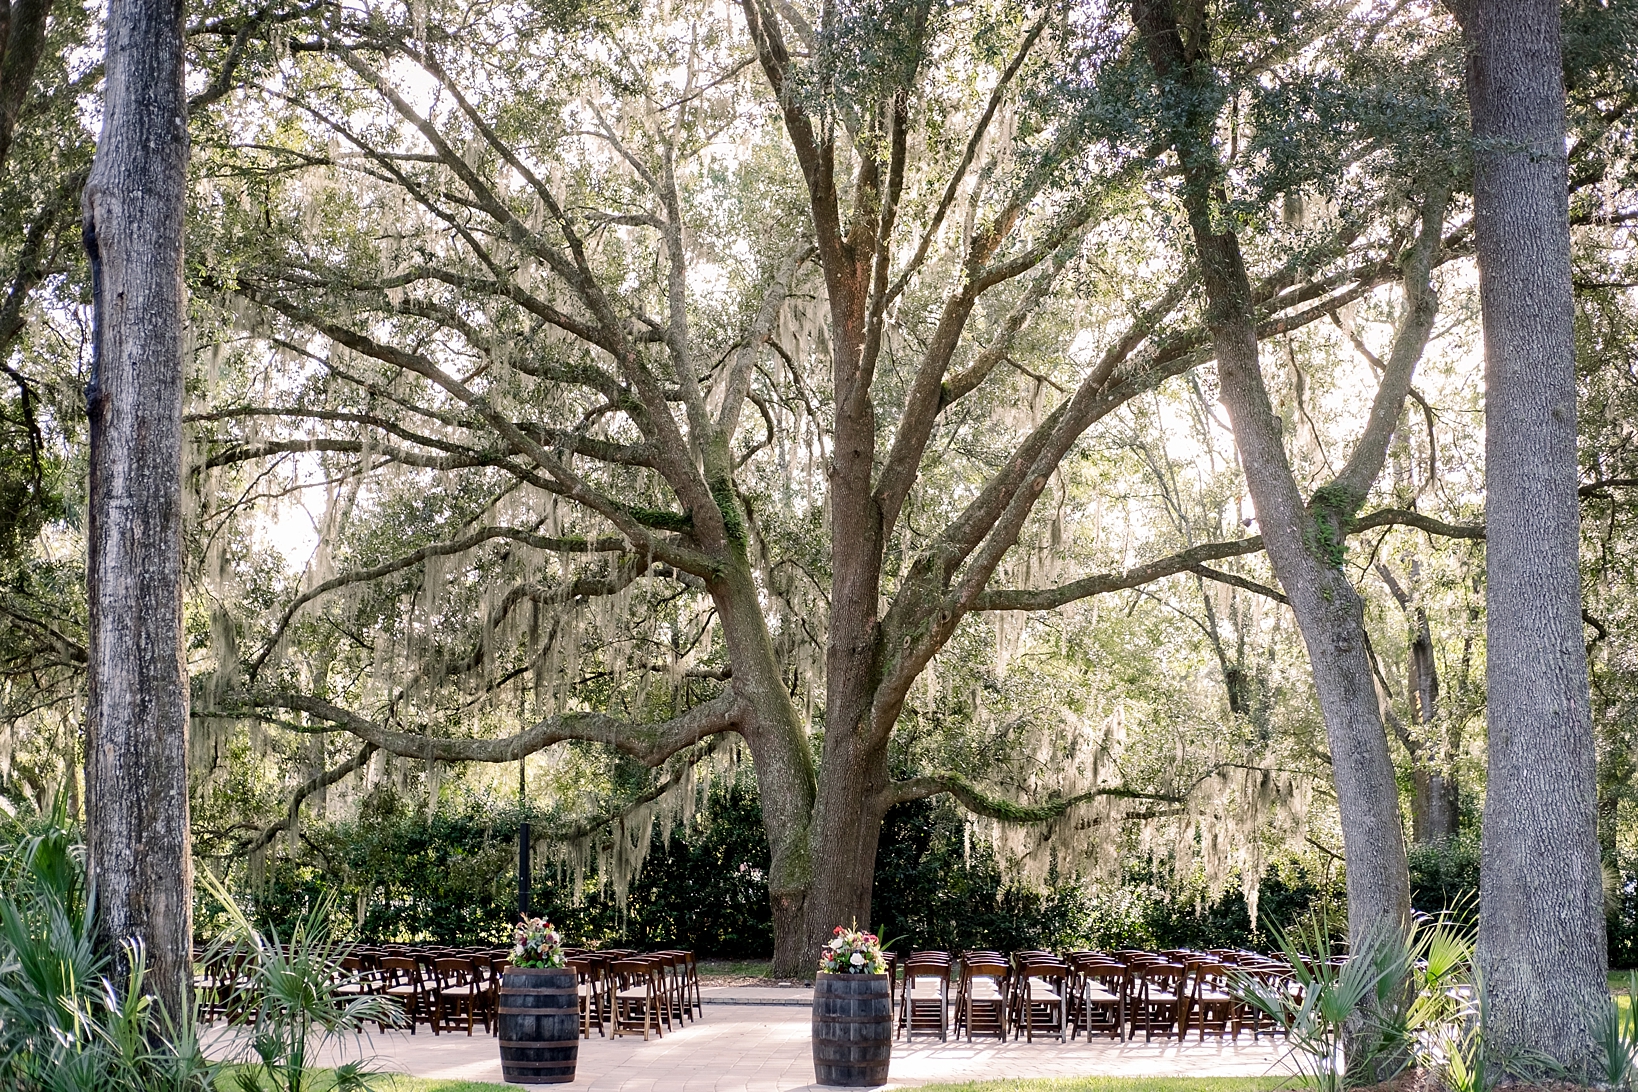 Sarah & Ben Photography took this photo of the Bowing Oaks Plantation wedding ceremony site